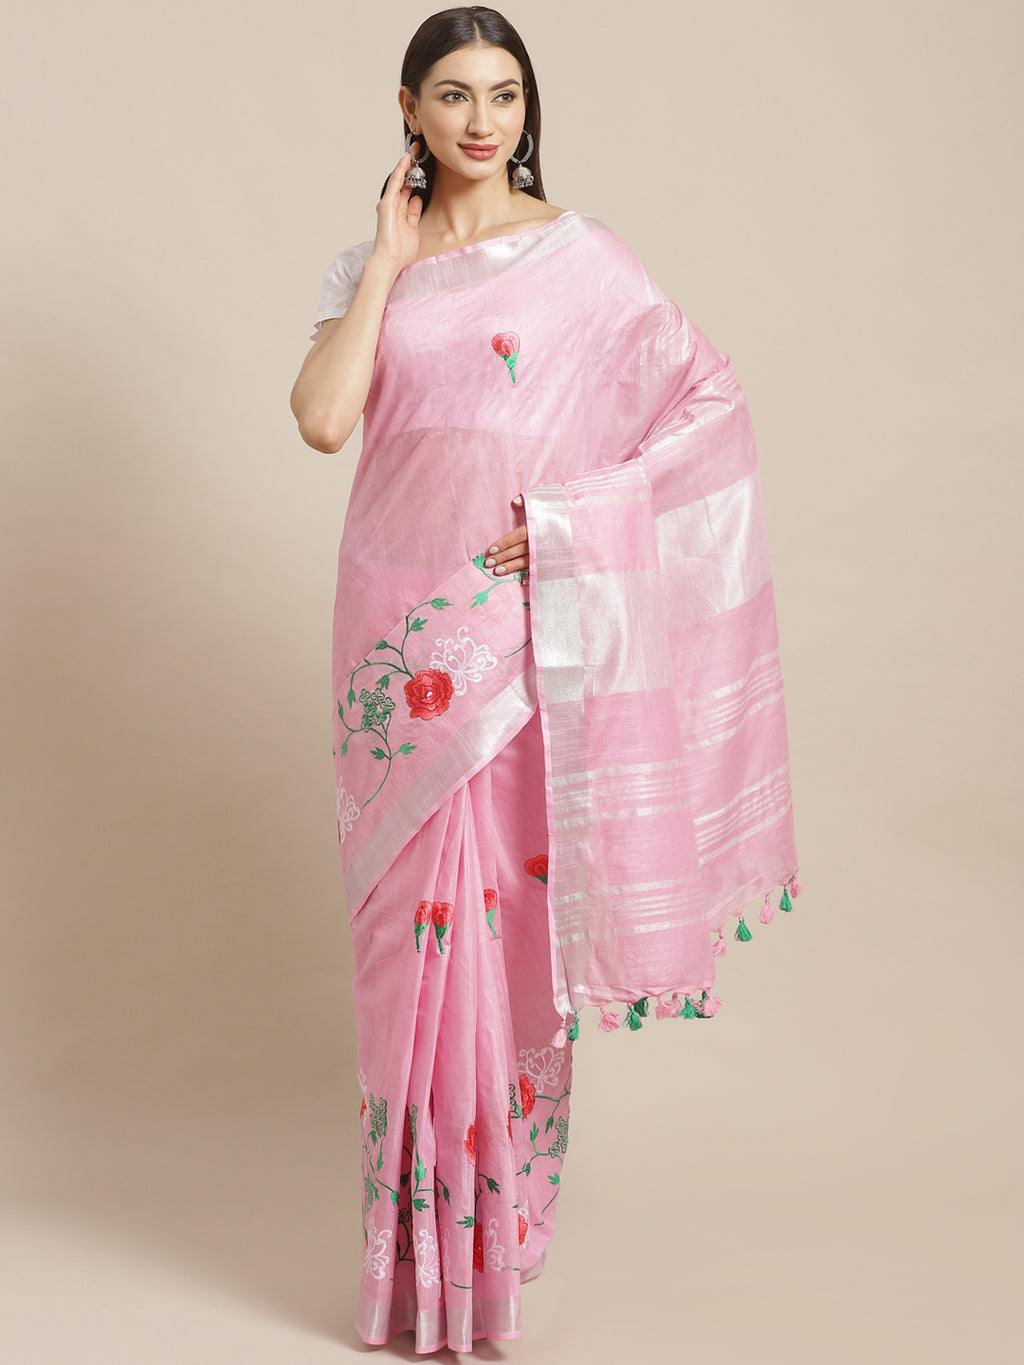 Pink and White, Kalakari India Linen Woven Saree and Blouse ALBGSA0054-Saree-Kalakari India-ALBGSA0054-Cotton, Geographical Indication, Hand Crafted, Heritage Prints, Linen, Natural Dyes, Red, Sarees, Shibori, Sustainable Fabrics, Woven, Yellow-[Linen,Ethnic,wear,Fashionista,Handloom,Handicraft,Indigo,blockprint,block,print,Cotton,Chanderi,Blue, latest,classy,party,bollywood,trendy,summer,style,traditional,formal,elegant,unique,style,hand,block,print, dabu,booti,gift,present,glamorous,affordable